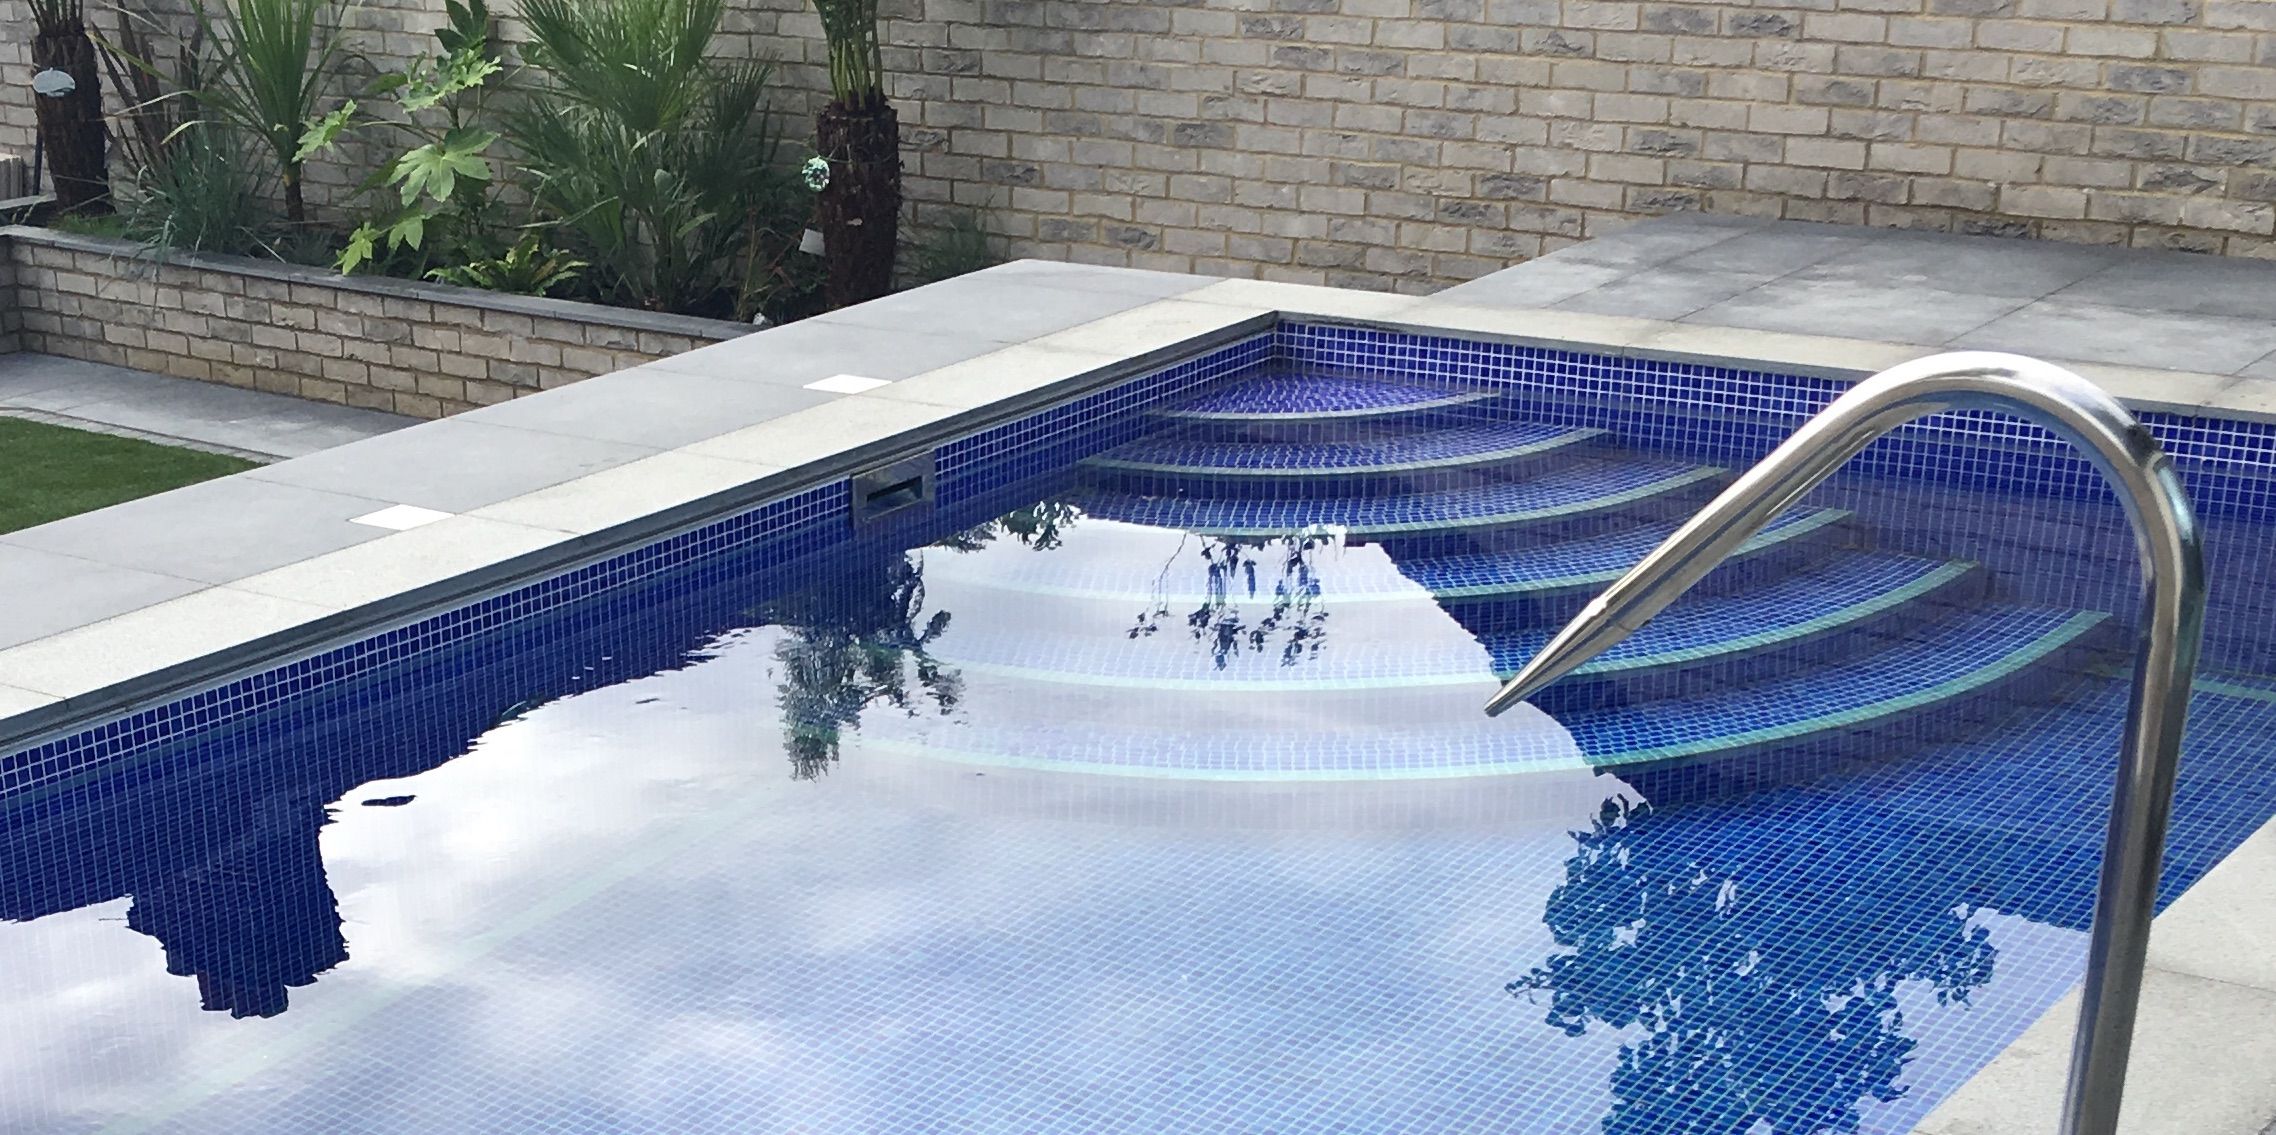 With a strong commitment to customer satisfaction, we expertly handle every aspect of planning permissions and ensure that our pool installations comply with all relevant regulations while enhancing your property's aesthetic appeal.